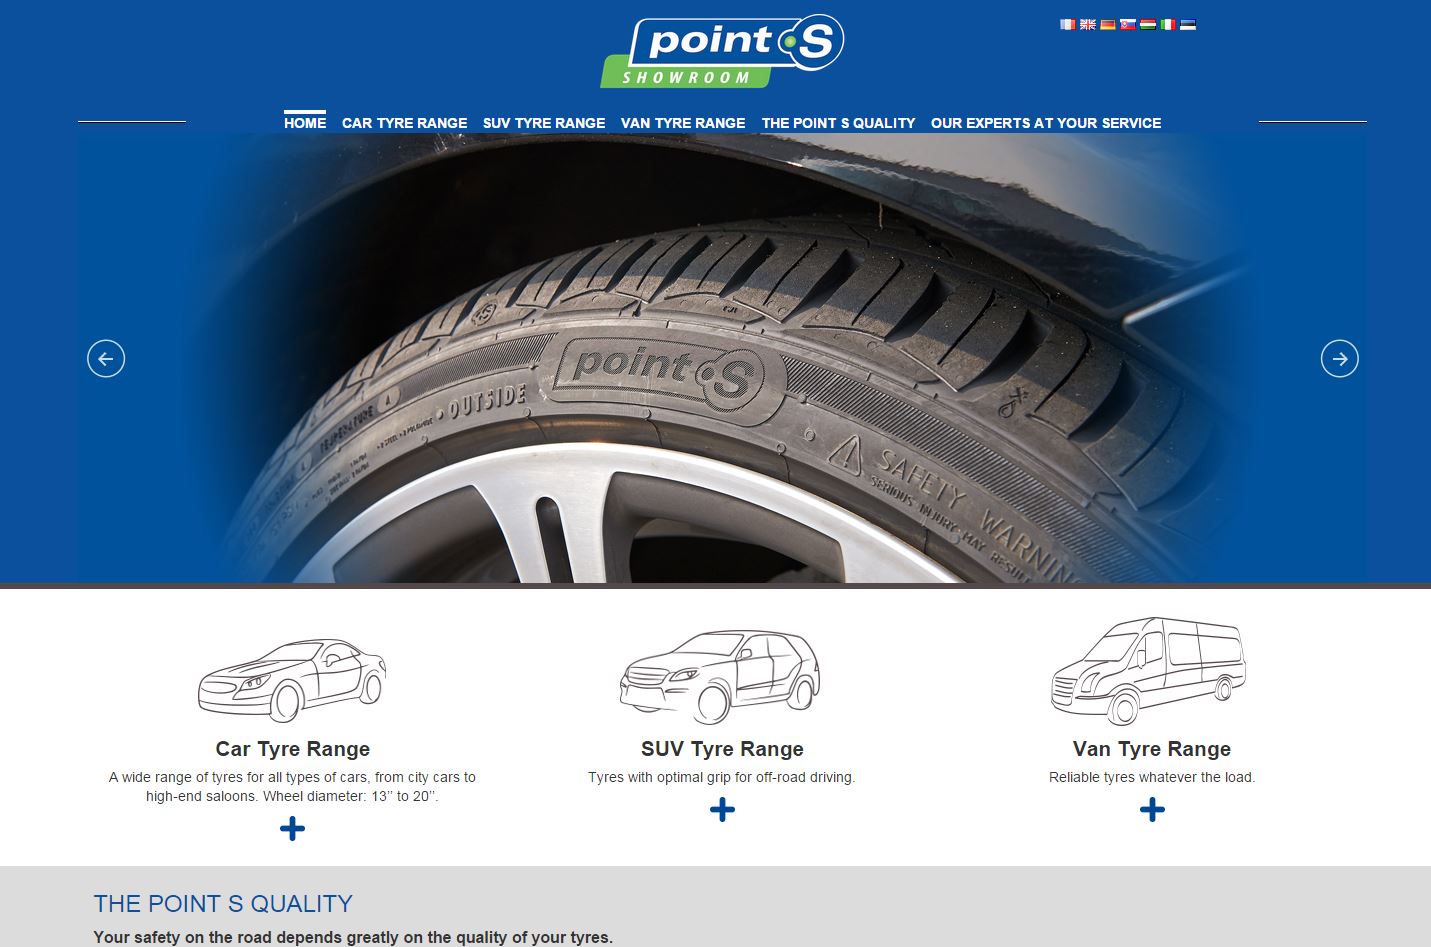 Special Offers on New Point S Tyres, Pre